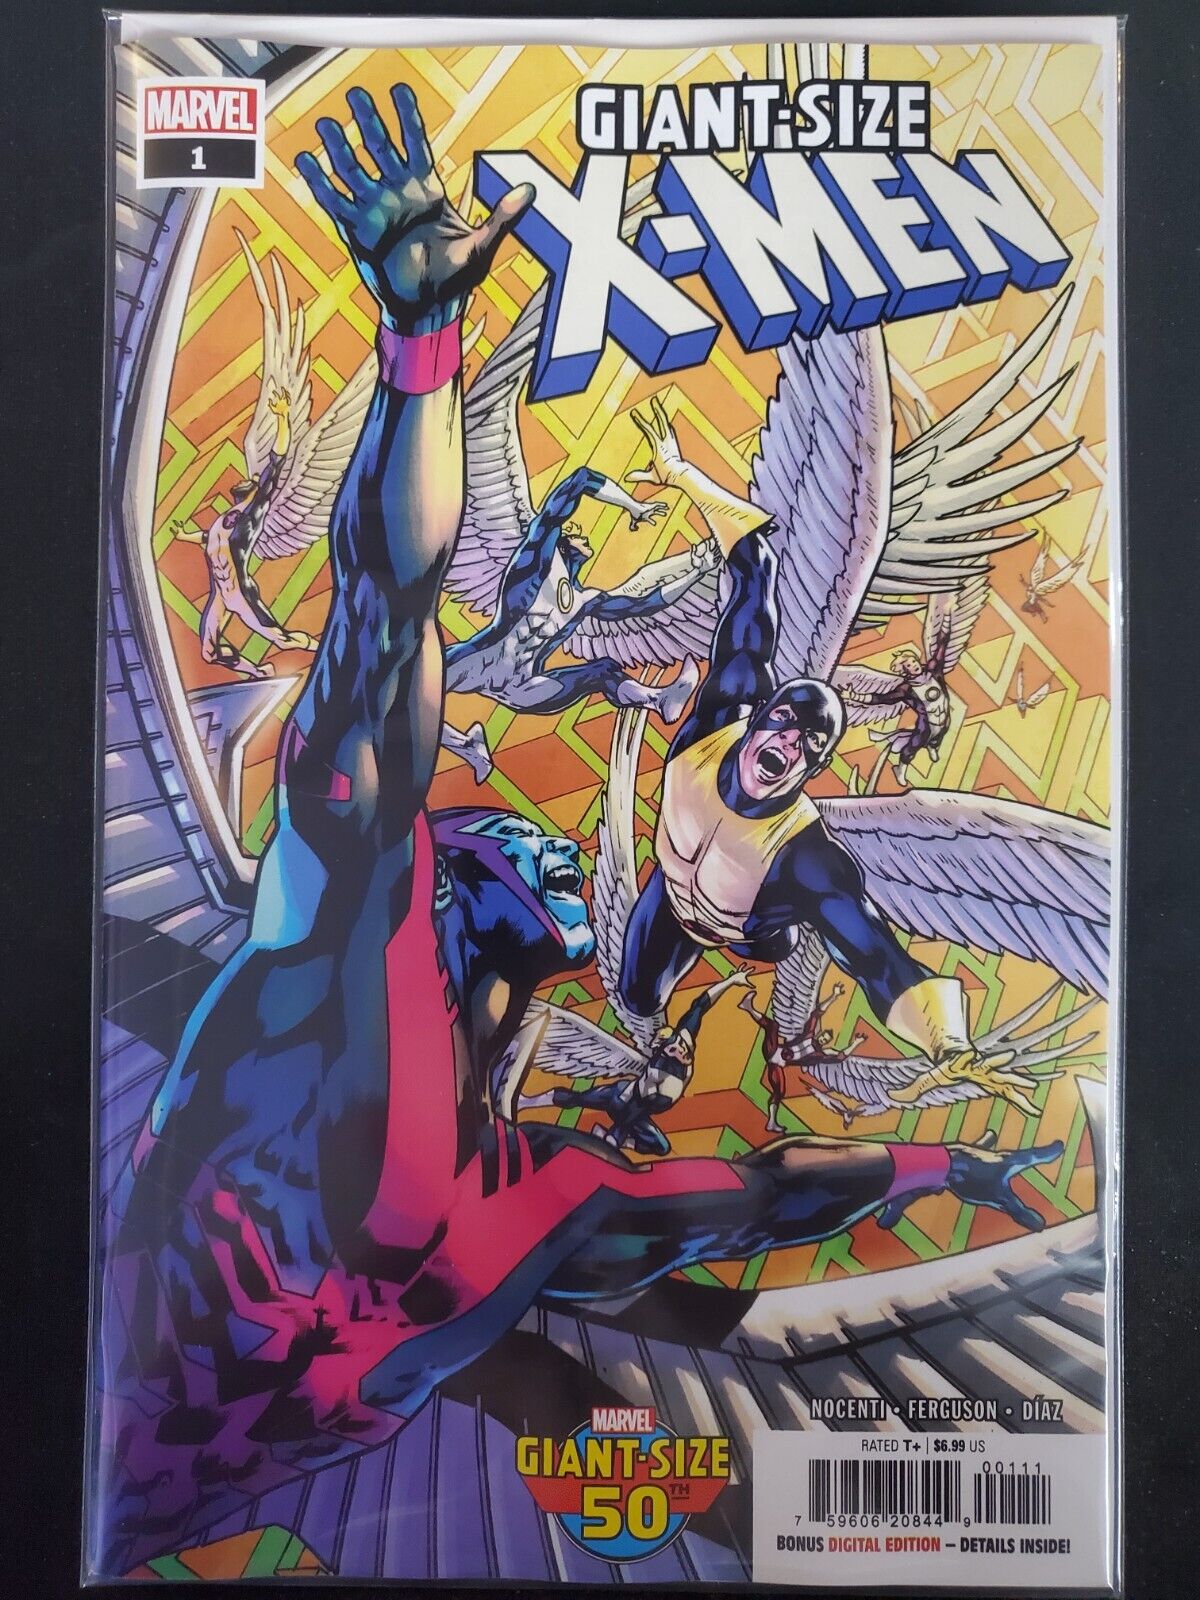 Giant-Size X-Men #1 Giant Size 50th Edition Marvel 2024 VF/NM Comics